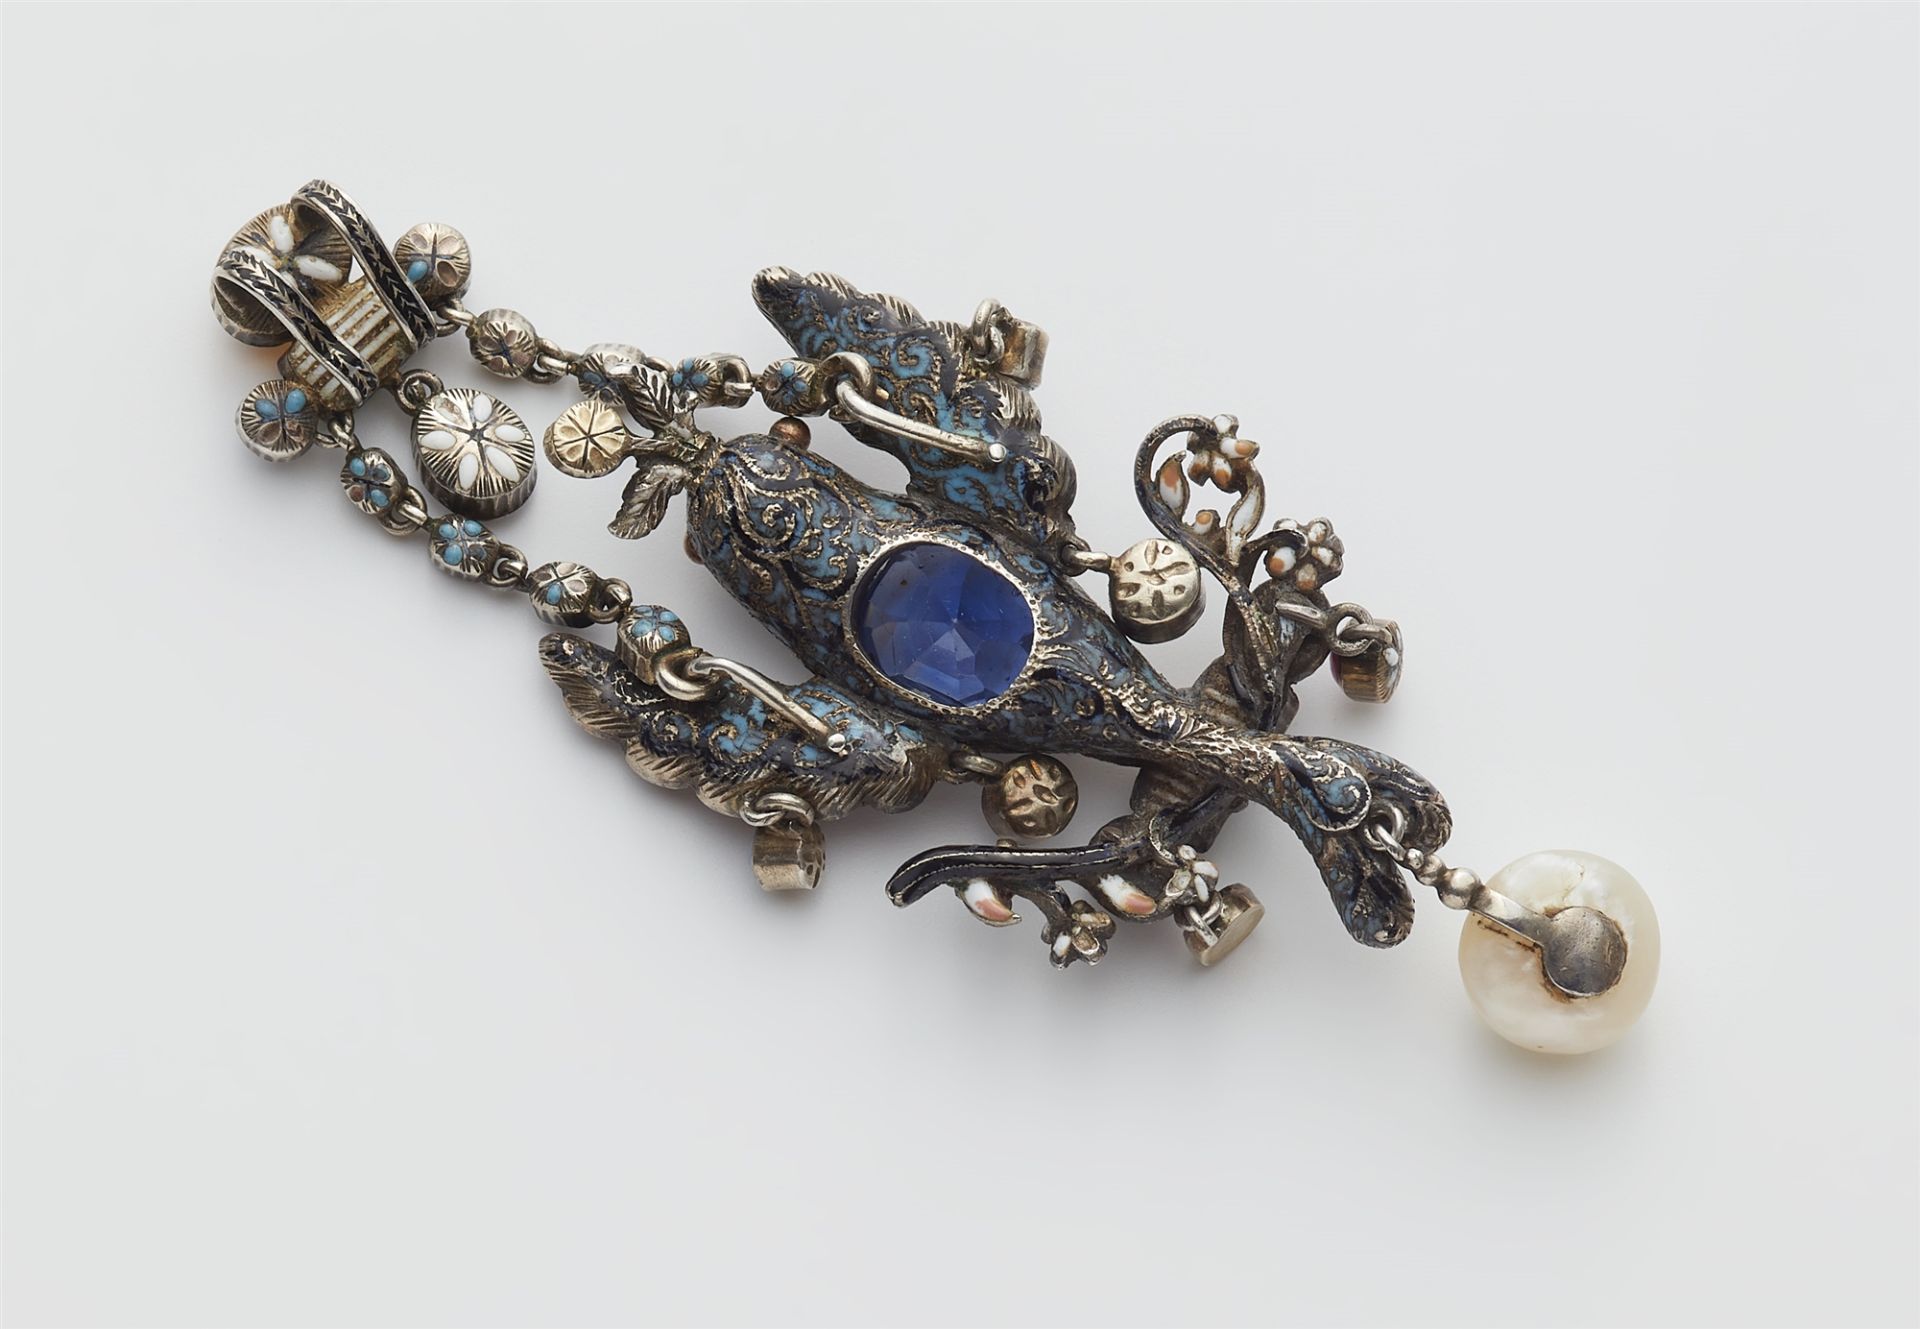 A silver enamel various gemstone and Ceylon sapphire Renaissance style pendant depicting a bird of p - Image 3 of 3